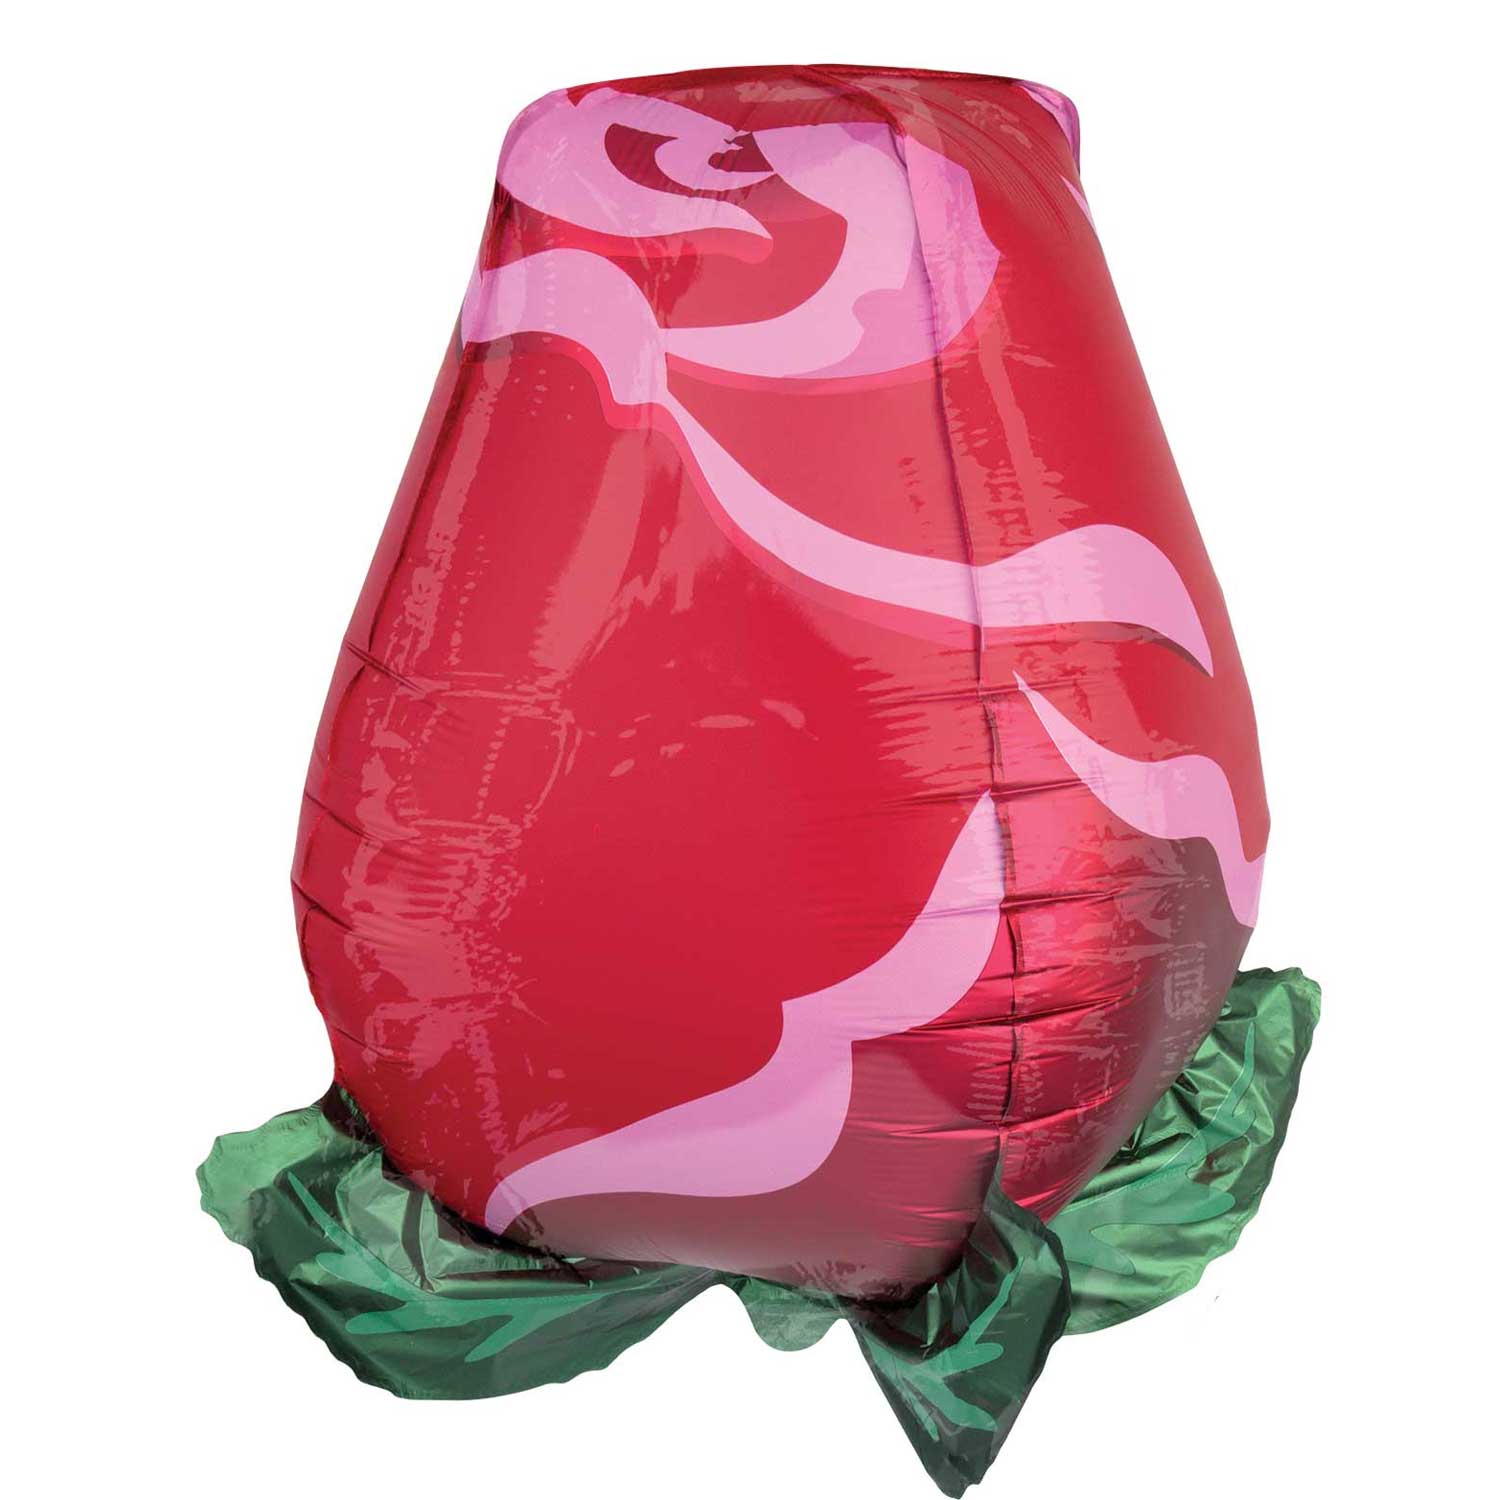 Red Rose Bud UltraShape Balloon 43x55cm Balloons & Streamers - Party Centre